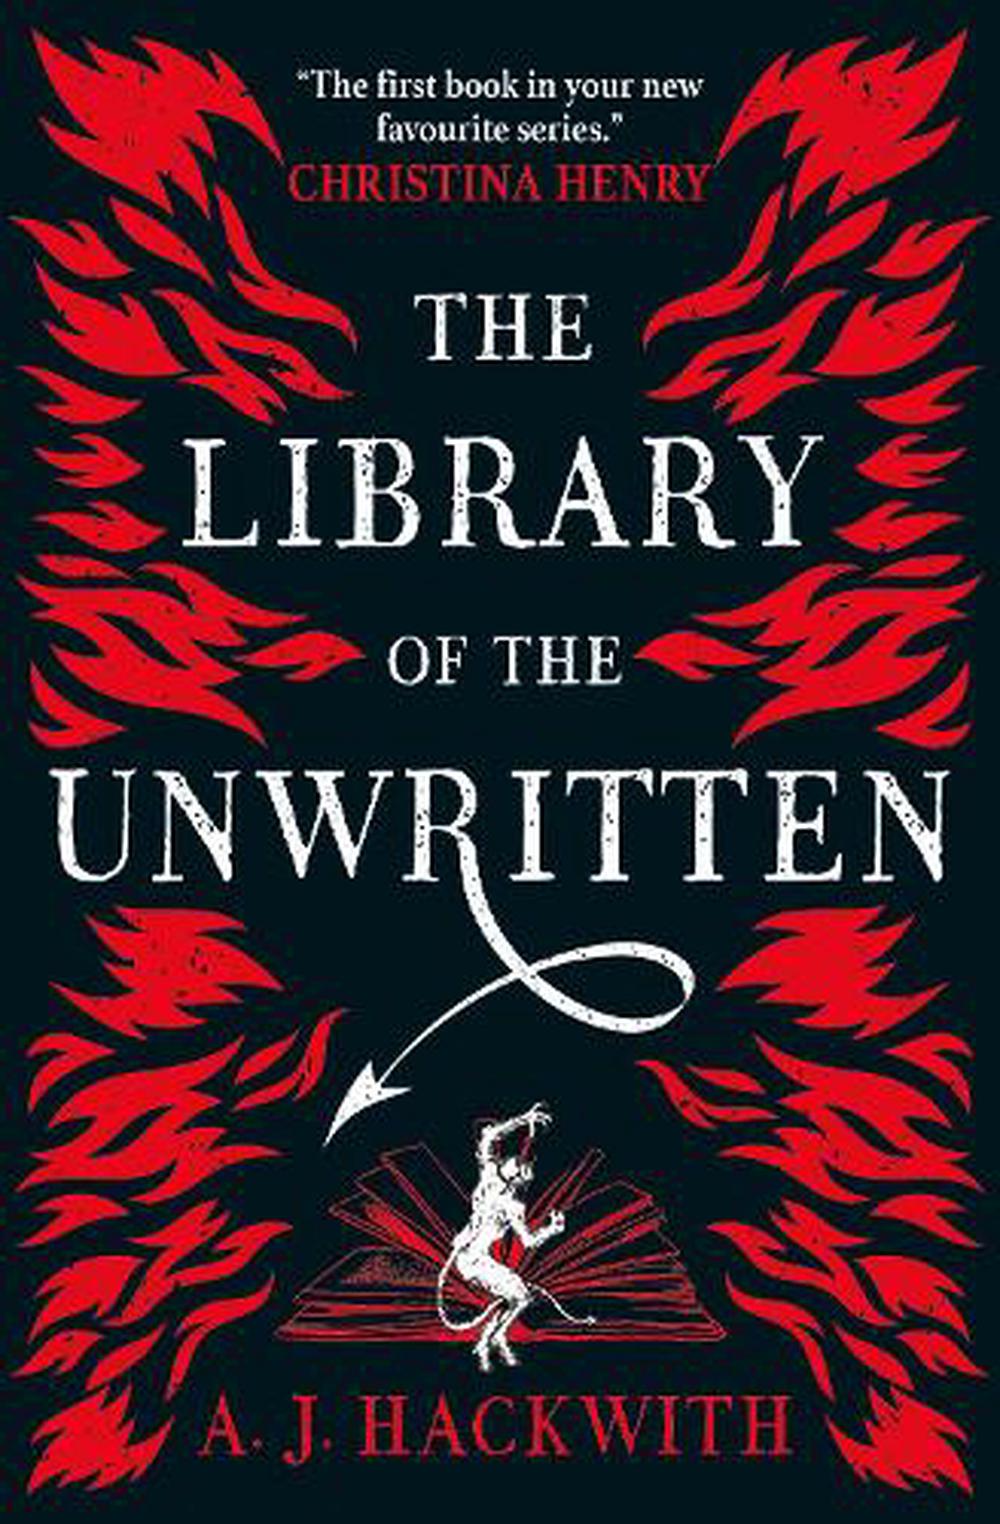 the library of the unwritten by aj hackwith